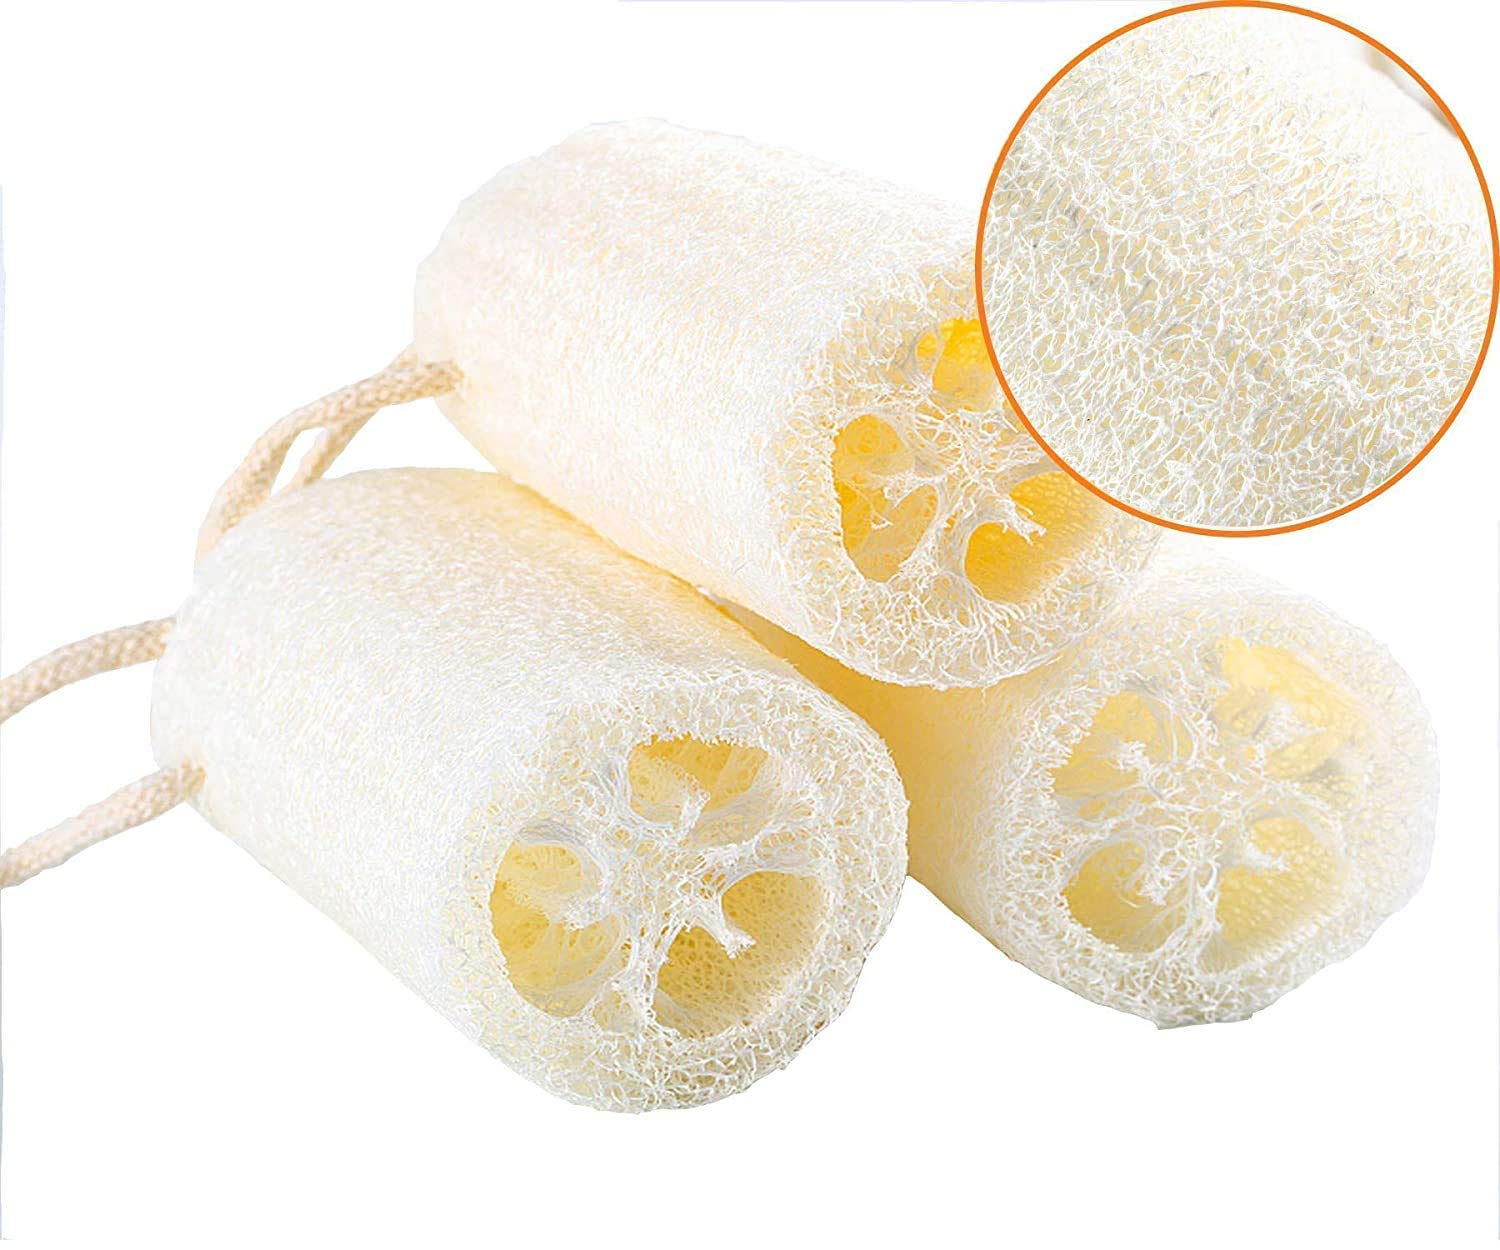 Natural Bathing Loofah, 3 Pack 6inch Length 100% Organic Shower Loofah  Sponge Exfoliating Loofah Sponge, Bath Body Scrubbers for Removing Dead  Skin